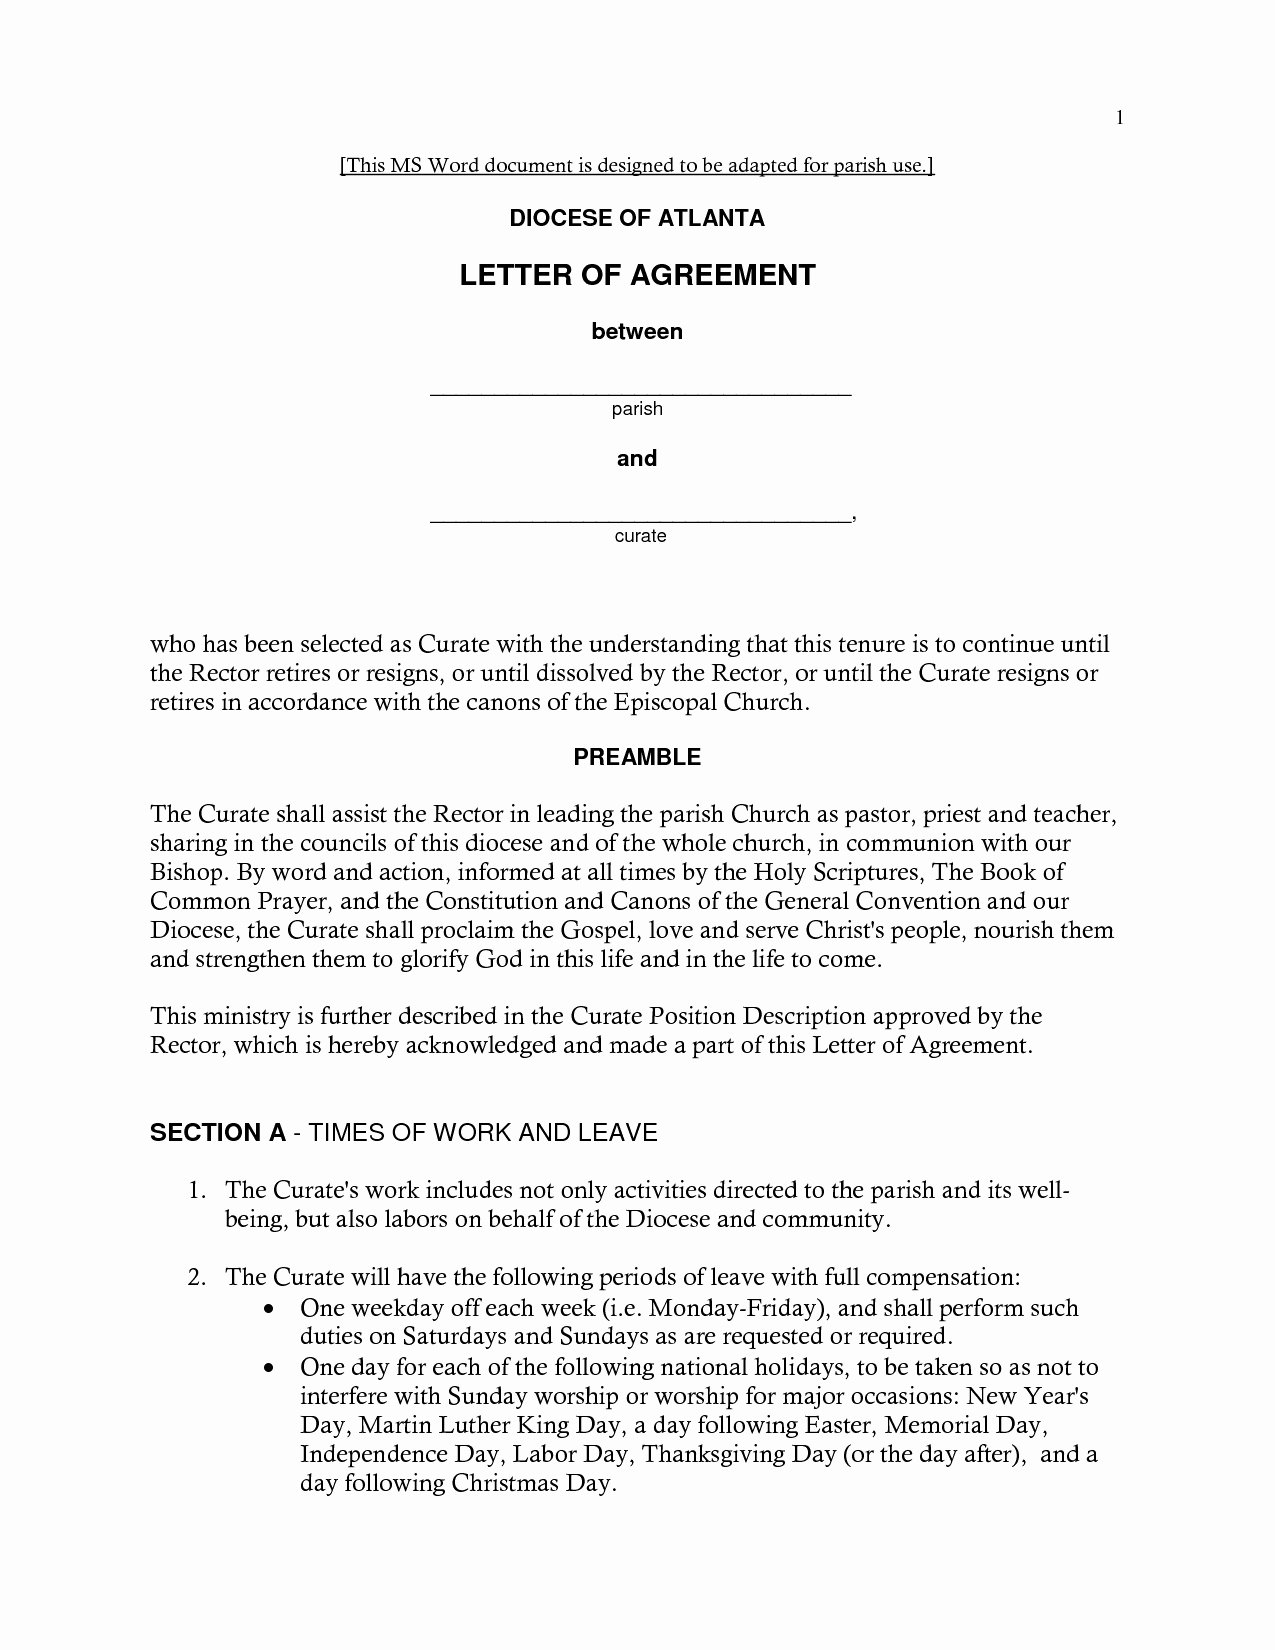 Real Estate Introduction Letter to Friends Template Unique Real Estate Introduction Letter to Friends Template